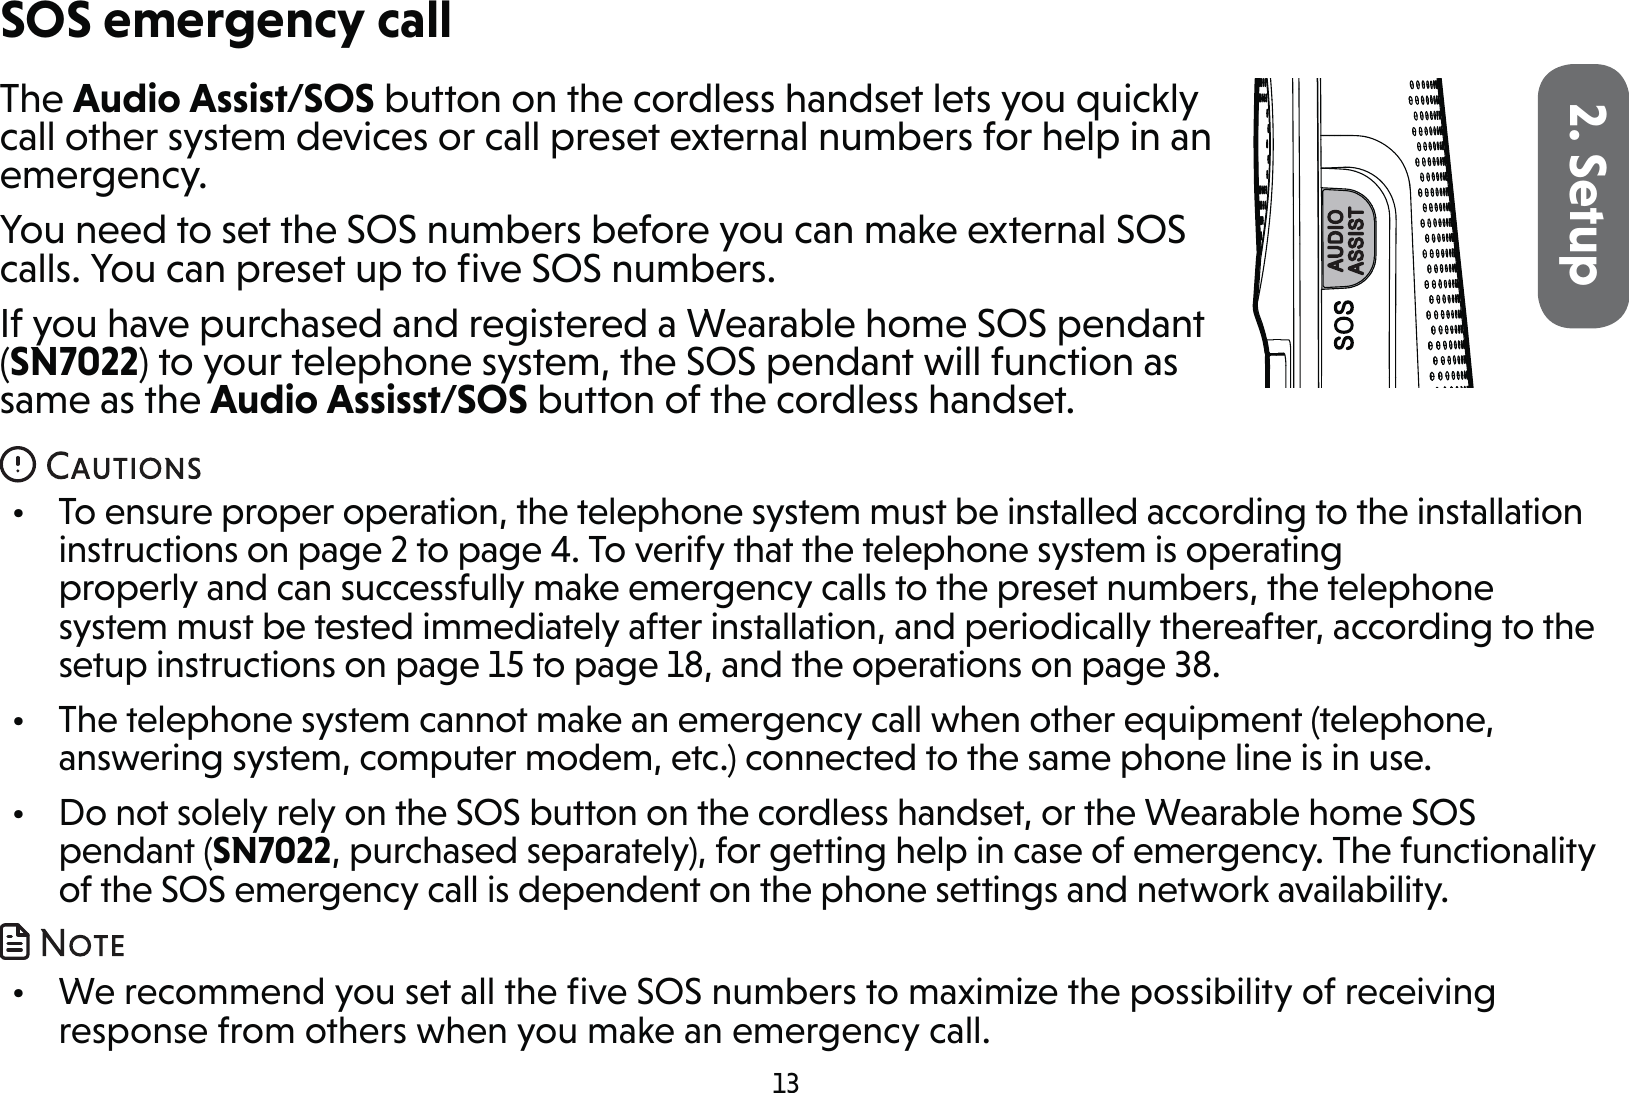 132. SetupThe Audio Assist/SOS button on the cordless handset lets you quickly call other system devices or call preset external numbers for help in an emergency.You need to set the SOS numbers before you can make external SOS calls. You can preset up to ﬁve SOS numbers.If you have purchased and registered a Wearable home SOS pendant (SN7022) to your telephone system, the SOS pendant will function as same as the Audio Assisst/SOS button of the cordless handset.•  To ensure proper operation, the telephone system must be installed according to the installation instructions on page 2 to page 4. To verify that the telephone system is operating properly and can successfully make emergency calls to the preset numbers, the telephone system must be tested immediately after installation, and periodically thereafter, according to the setup instructions on page 15 to page 18, and the operations on page 38.•  The telephone system cannot make an emergency call when other equipment (telephone, answering system, computer modem, etc.) connected to the same phone line is in use.•  Do not solely rely on the SOS button on the cordless handset, or the Wearable home SOS pendant (SN7022, purchased separately), for getting help in case of emergency. The functionality of the SOS emergency call is dependent on the phone settings and network availability. •  We recommend you set all the ﬁve SOS numbers to maximize the possibility of receiving response from others when you make an emergency call.SOS emergency call